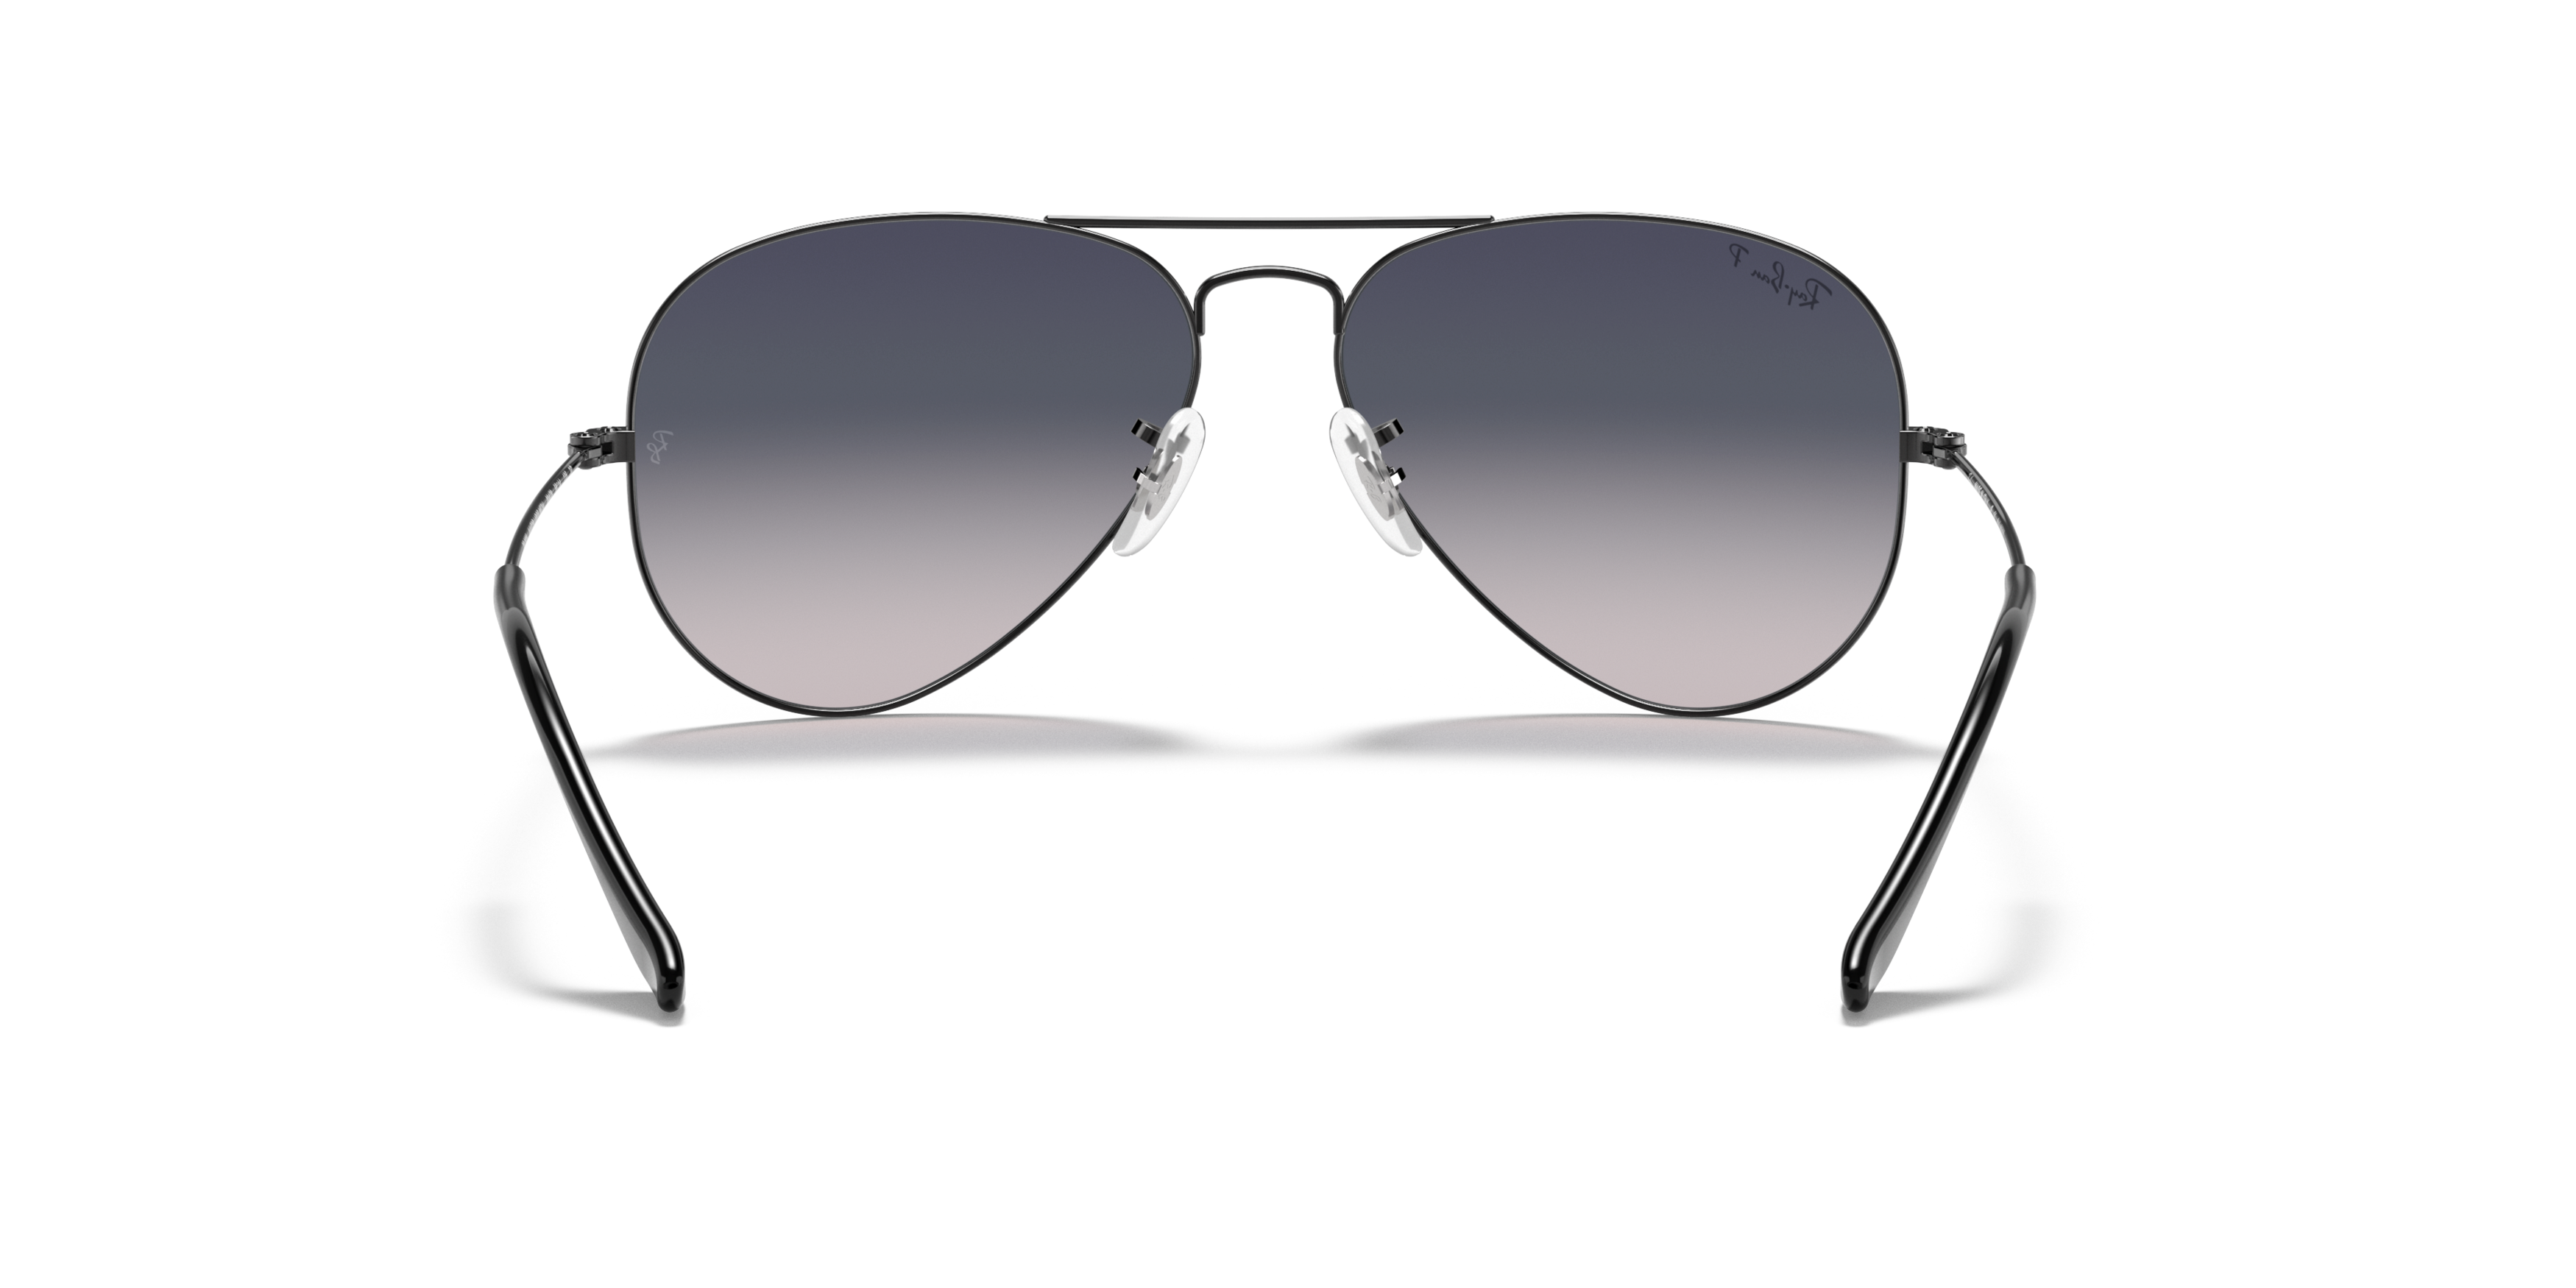 Detail02 Ray-Ban Aviator RB 3025 (167/1R) Sunglasses Violet / Gold